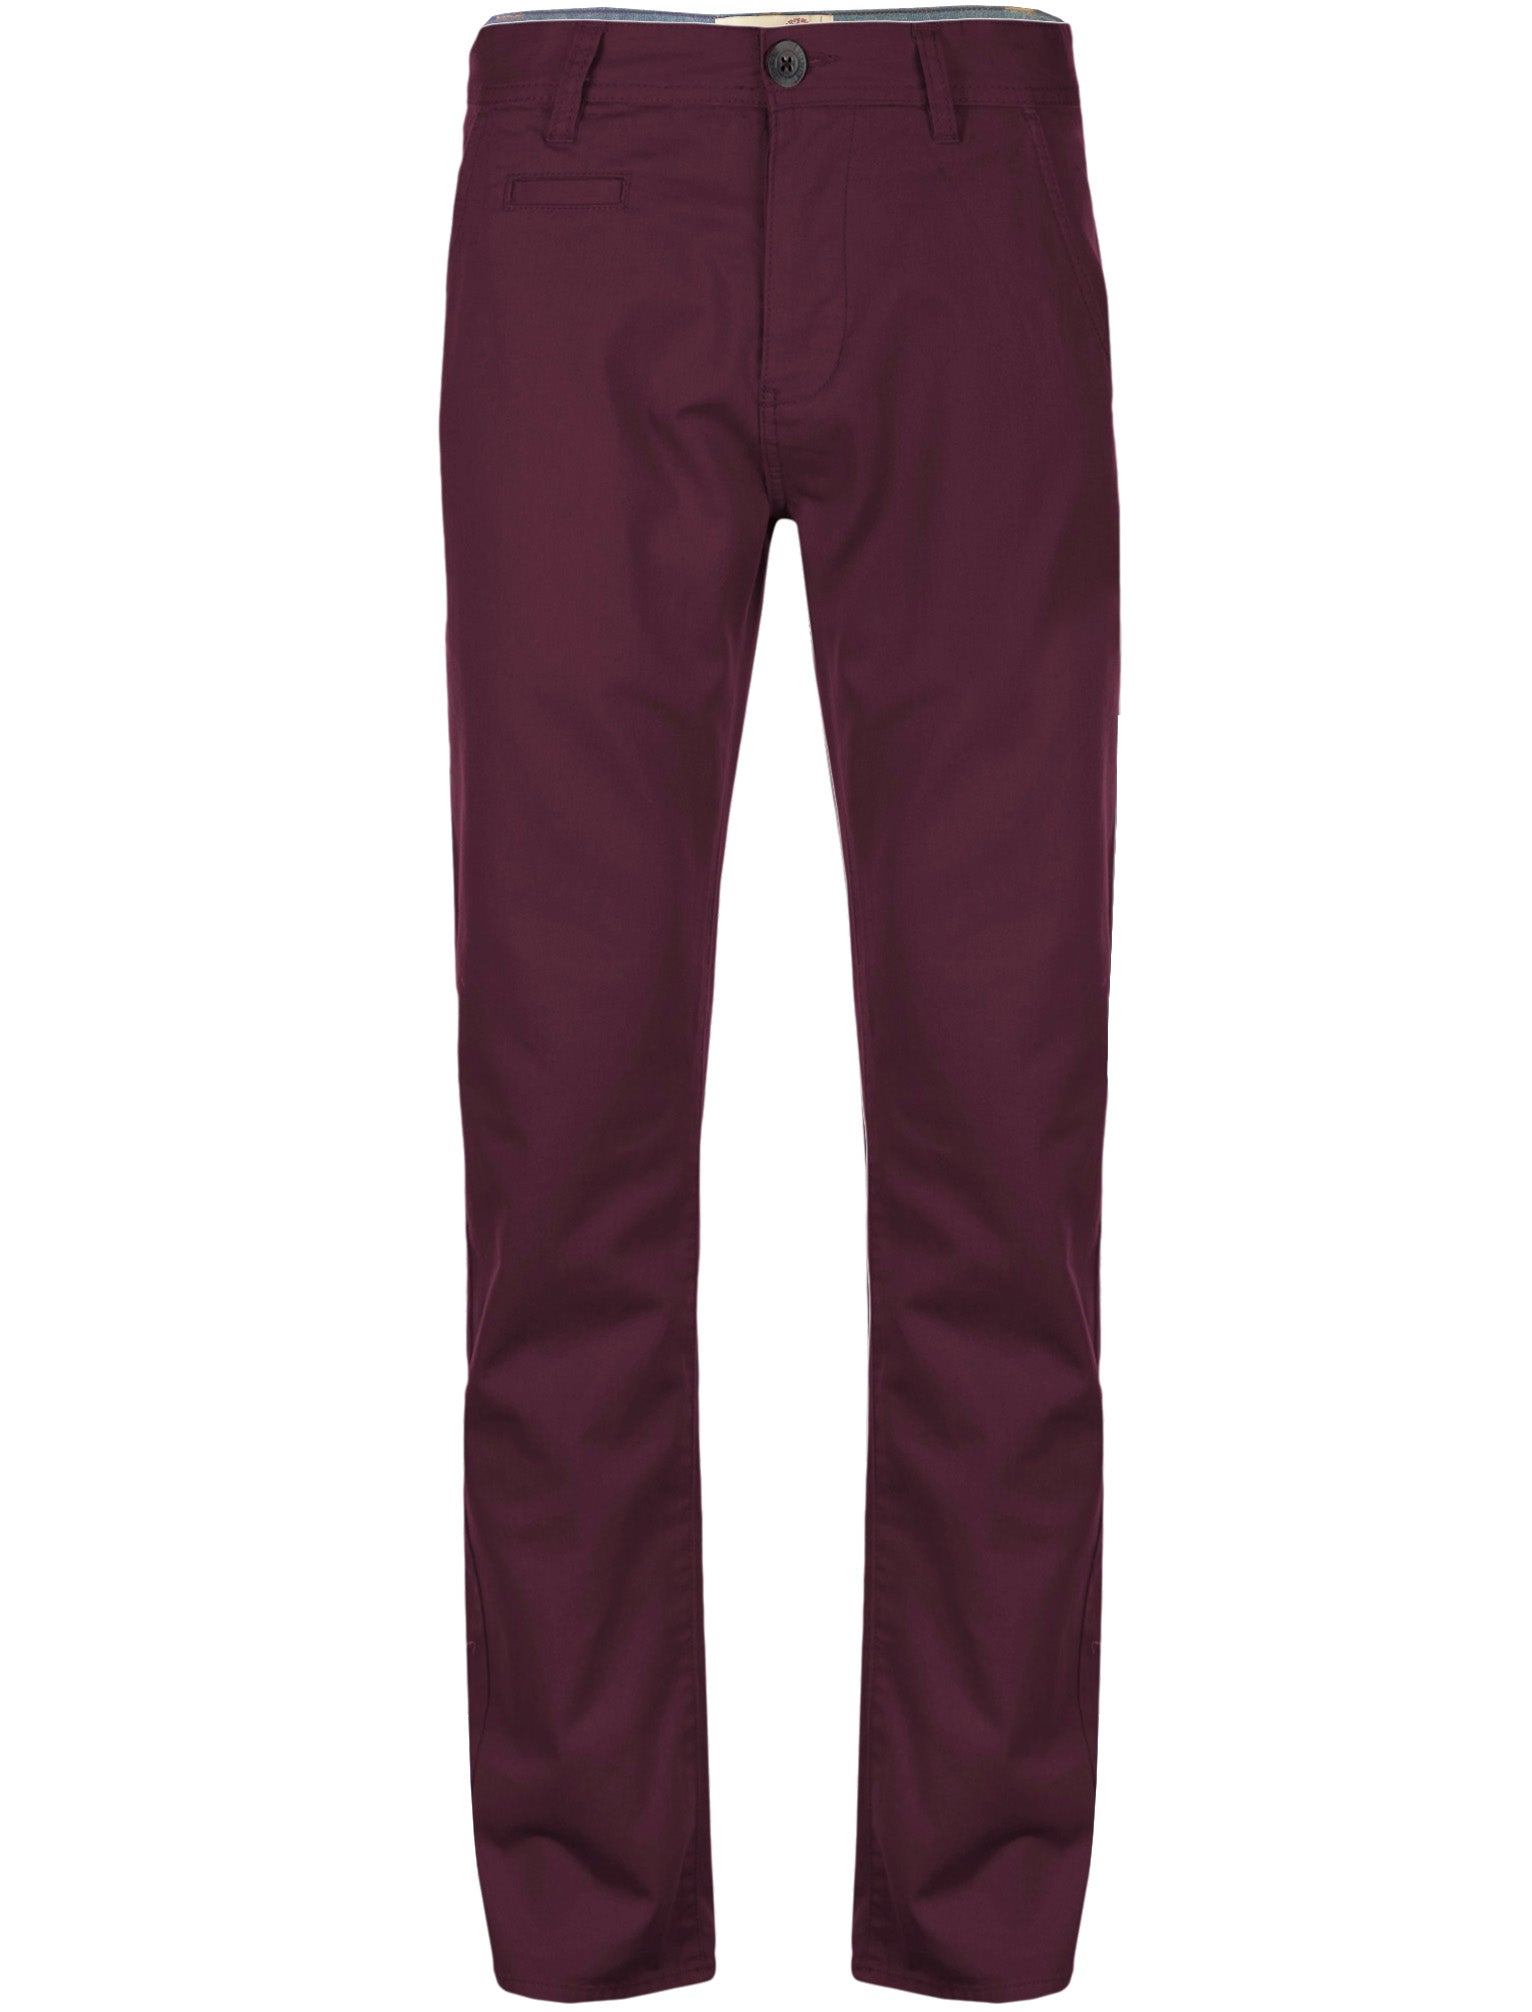 Trousers Flynn Cotton Twill Chino Trousers in Oxblood - Tokyo Laundry / 28S - Tokyo Laundry